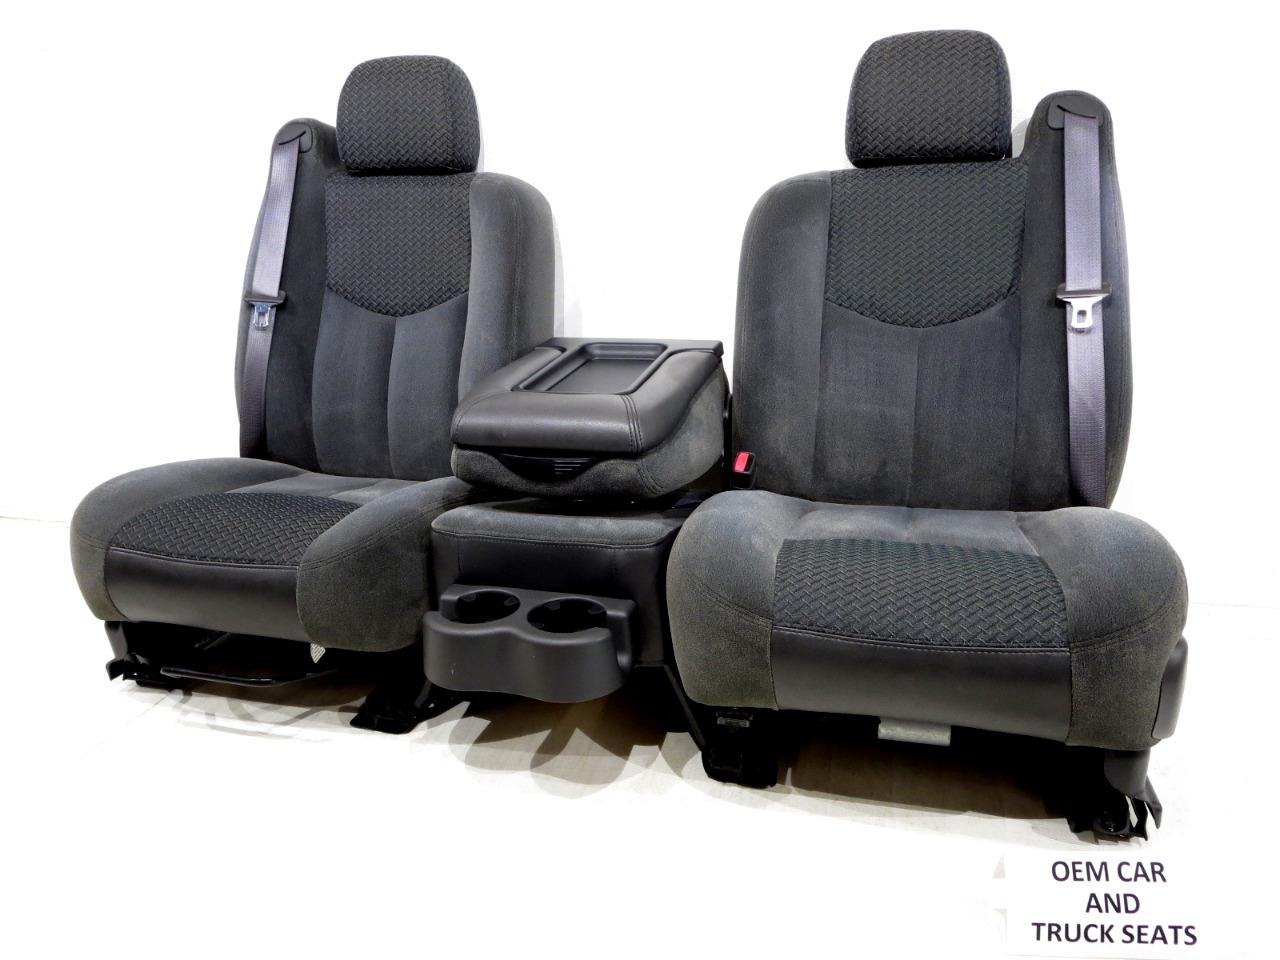 replacement gm chevy avalanche oem grey cloth front seats silverado 2003 2004 2005 2006 stock 7894i gm chevy avalanche oem grey cloth front seats silverado 2003 2004 2005 2006